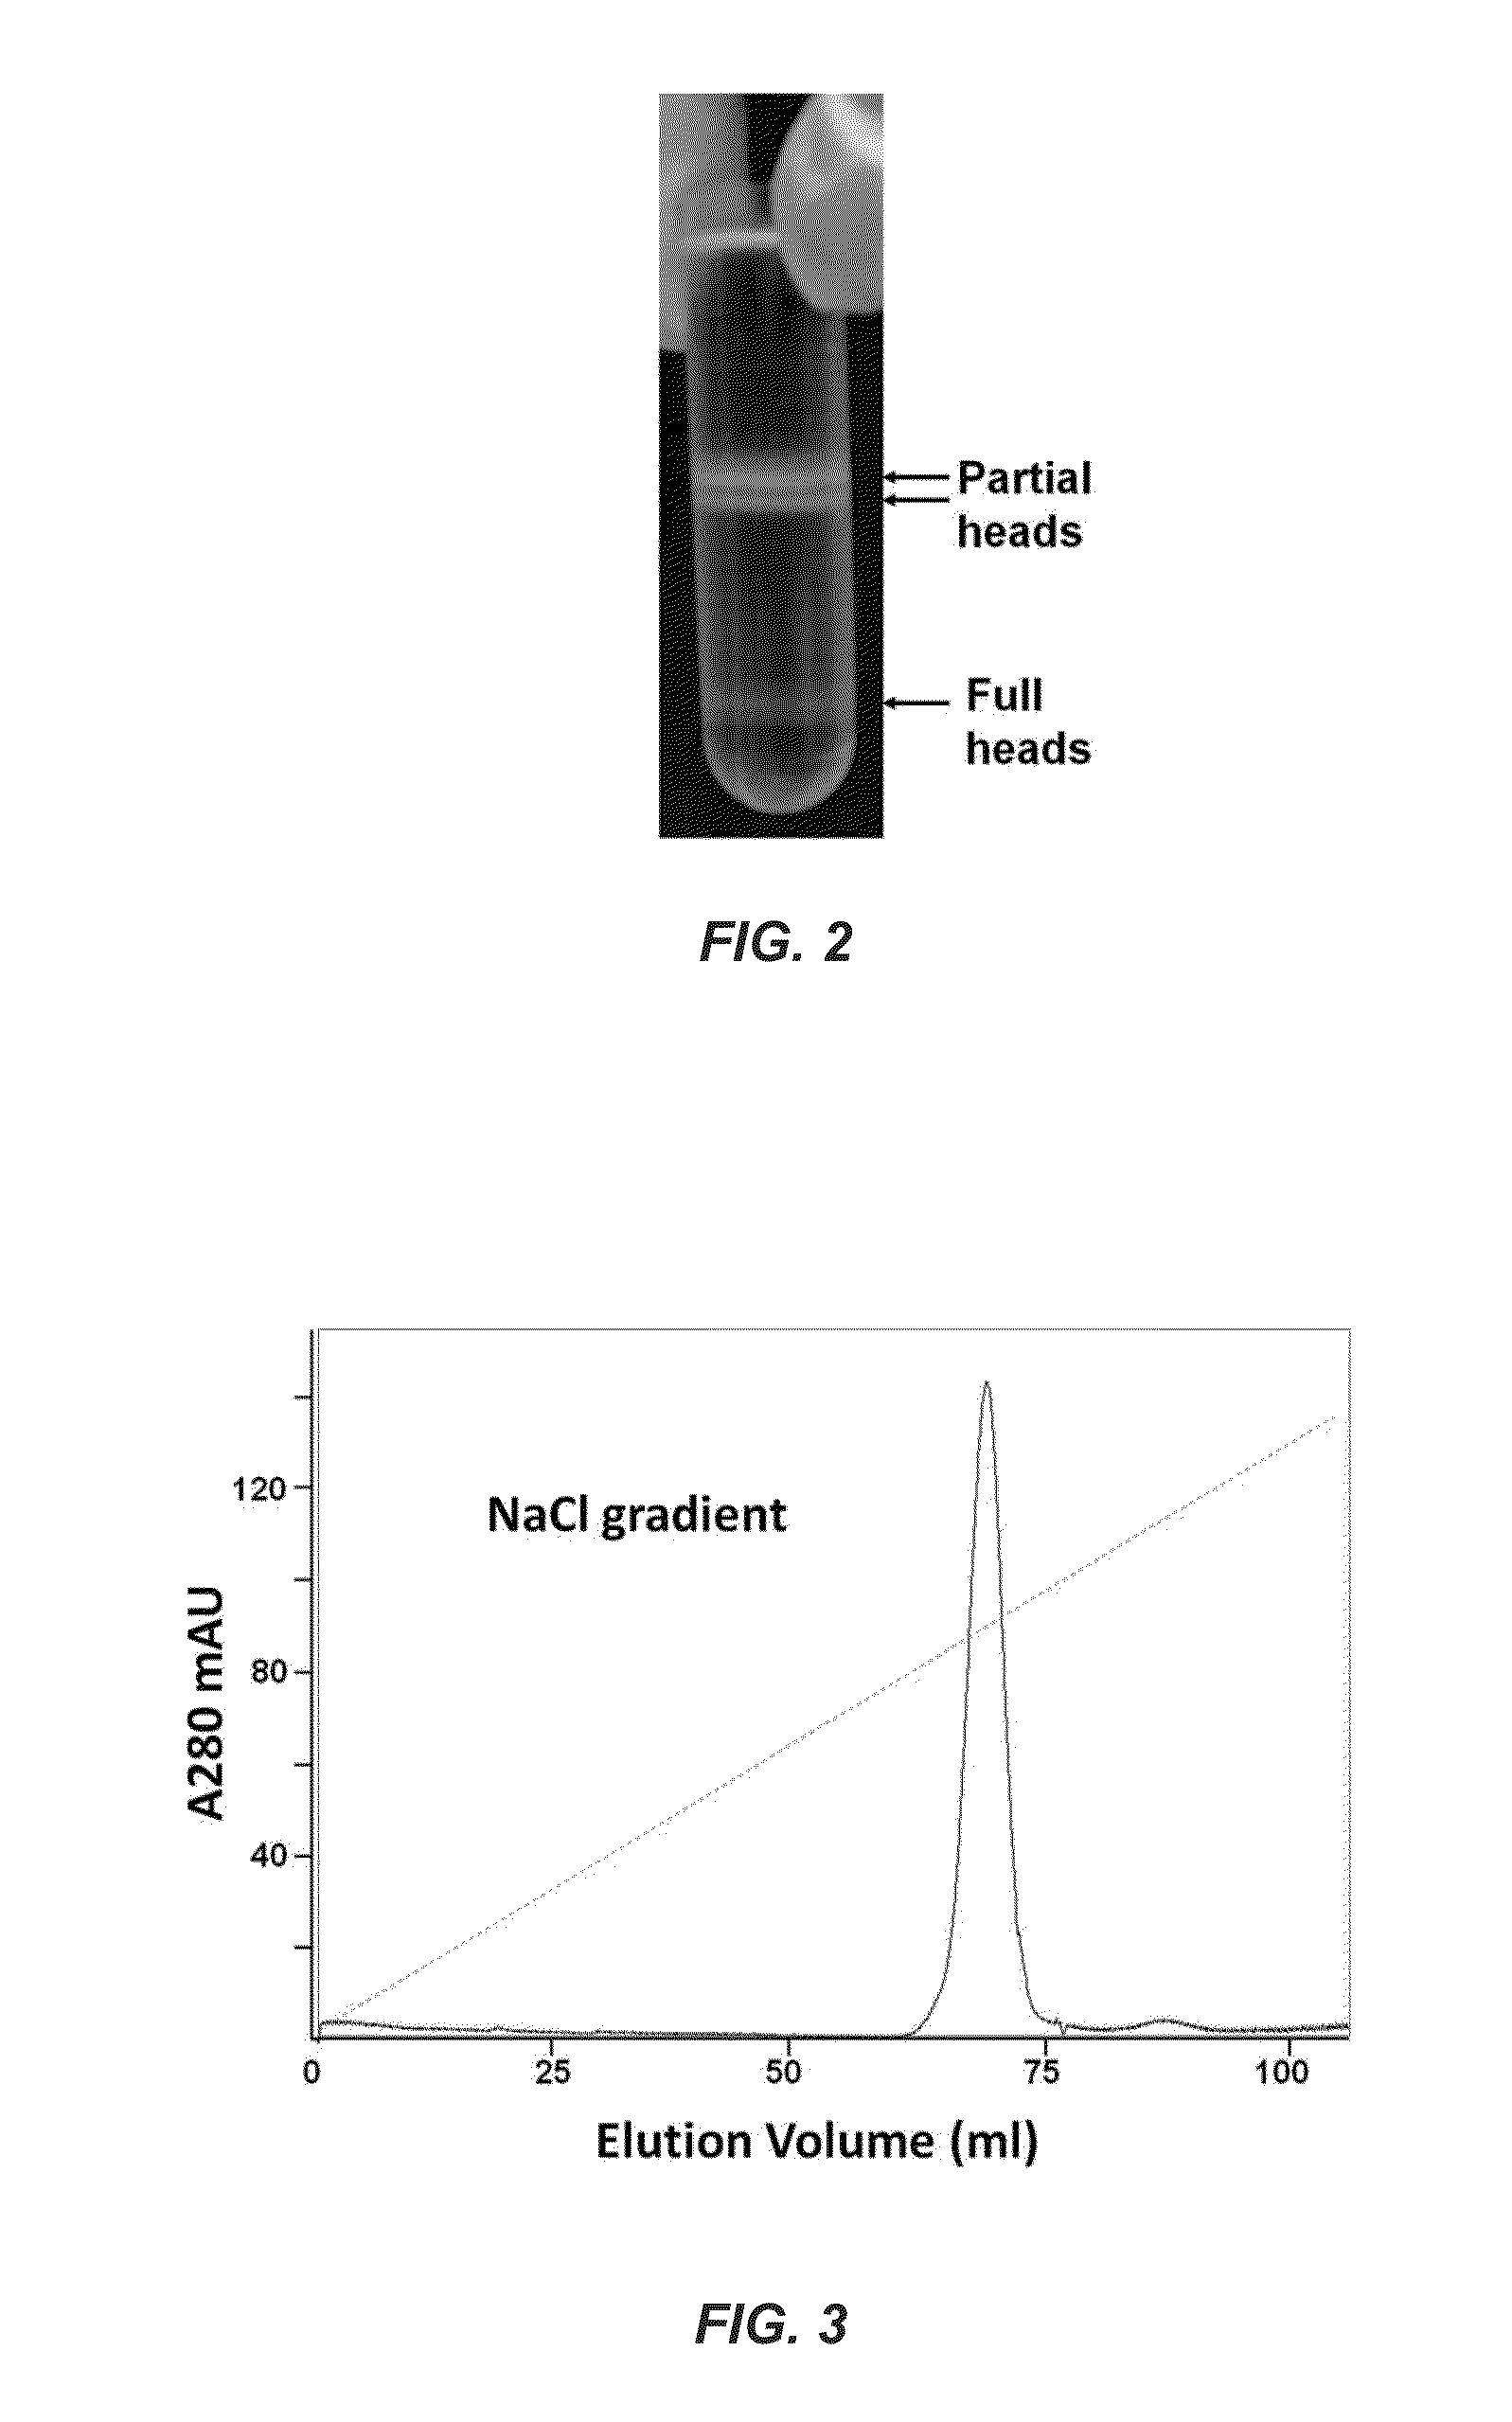 Protein and nucleic acid delivery vehicles, components and mechanisms thereof